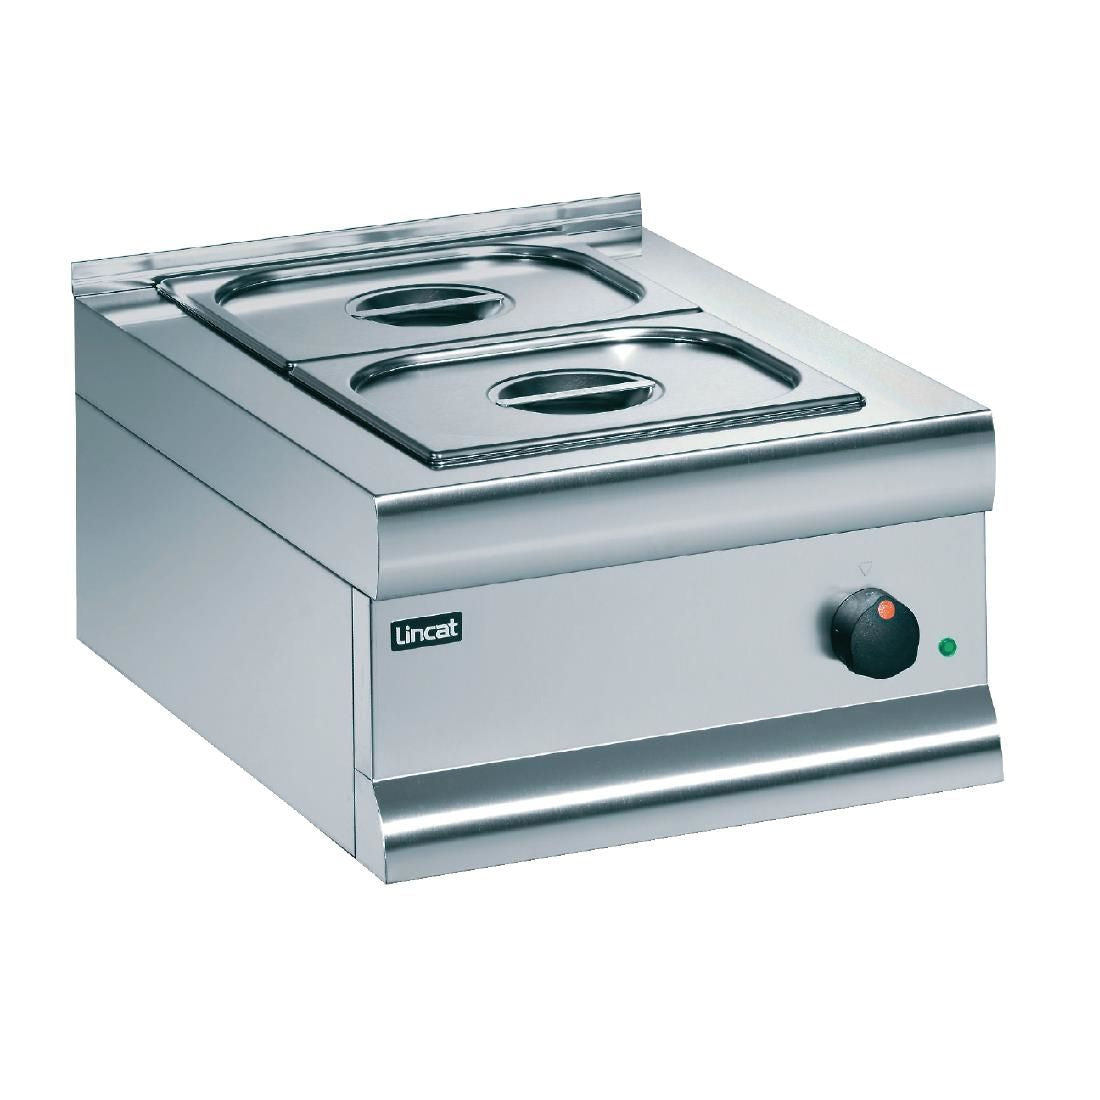 BM4A - Lincat Silverlink 600 Electric Counter-top Bain Marie - Dry Heat - Gastronorms - Base + Dish Pack - W 450 mm - 0.75 kW JD Catering Equipment Solutions Ltd